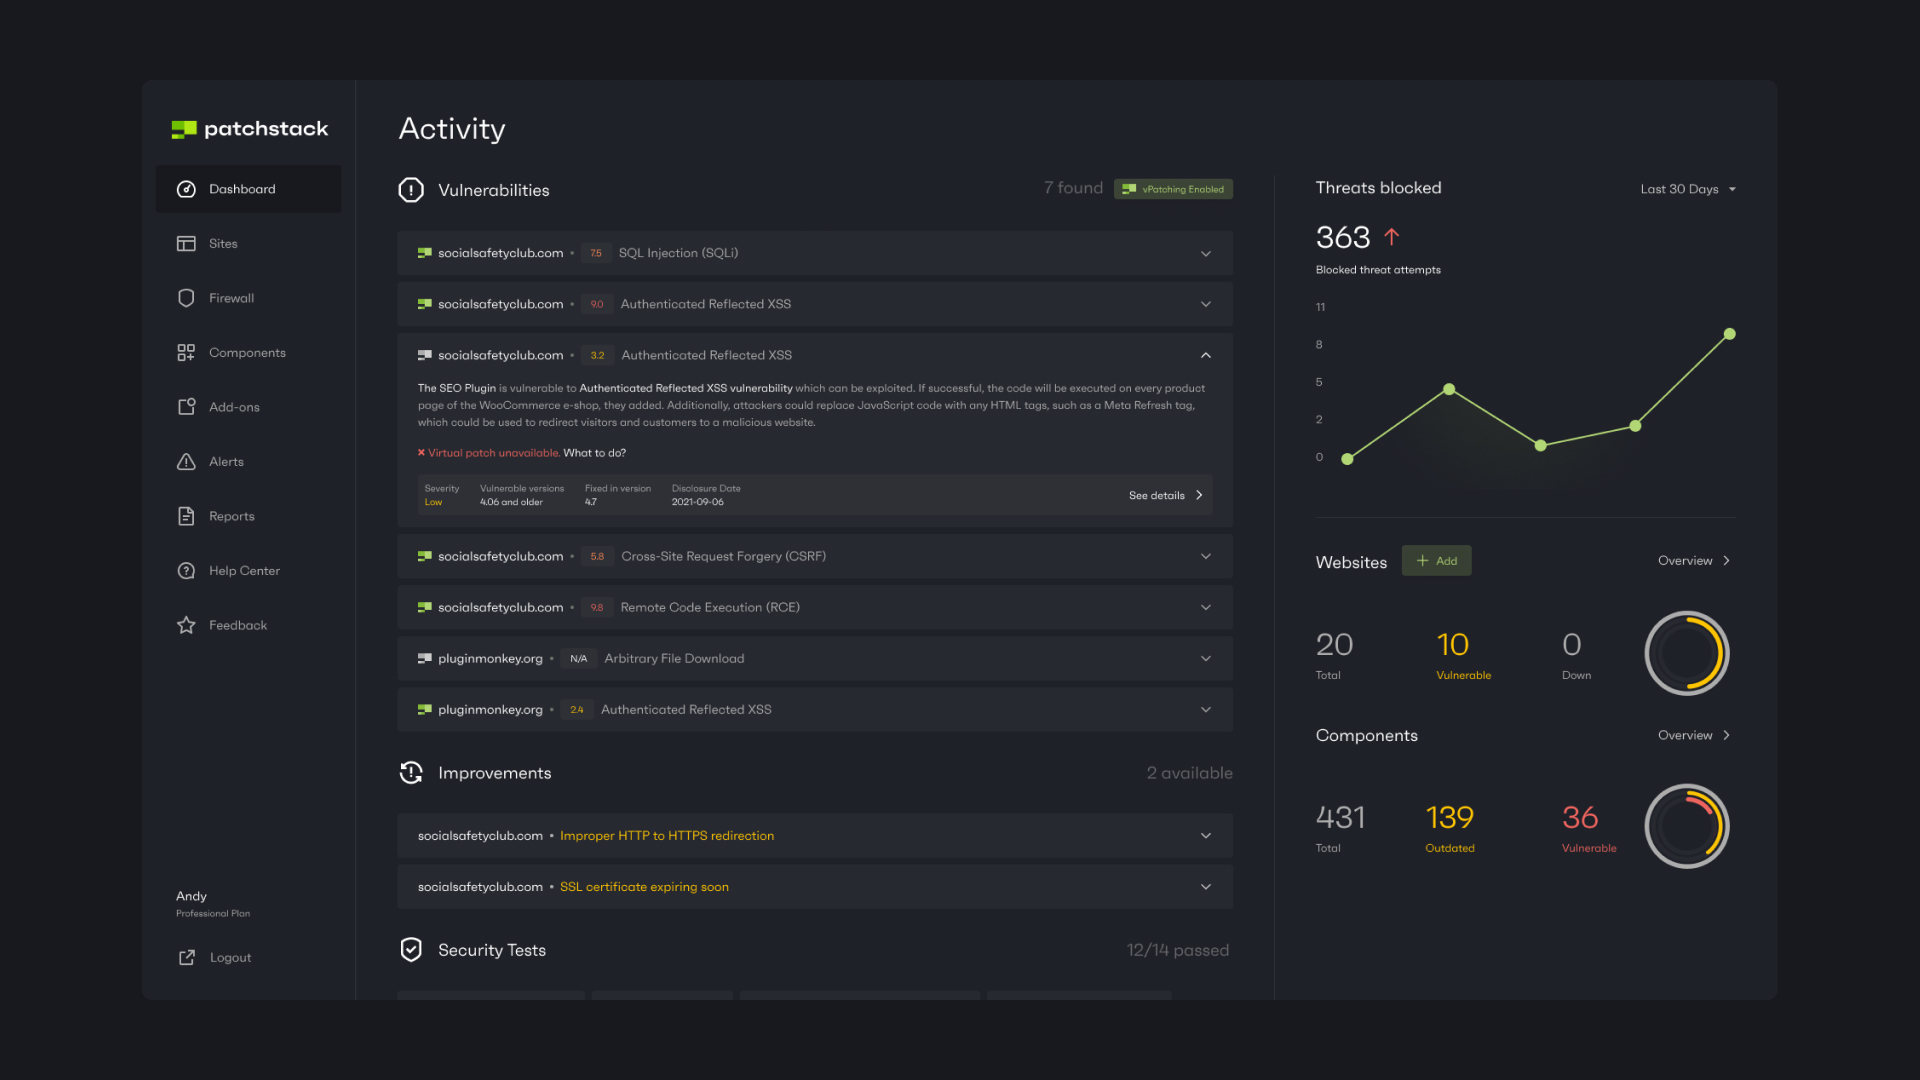 Patchstack App Dashboard